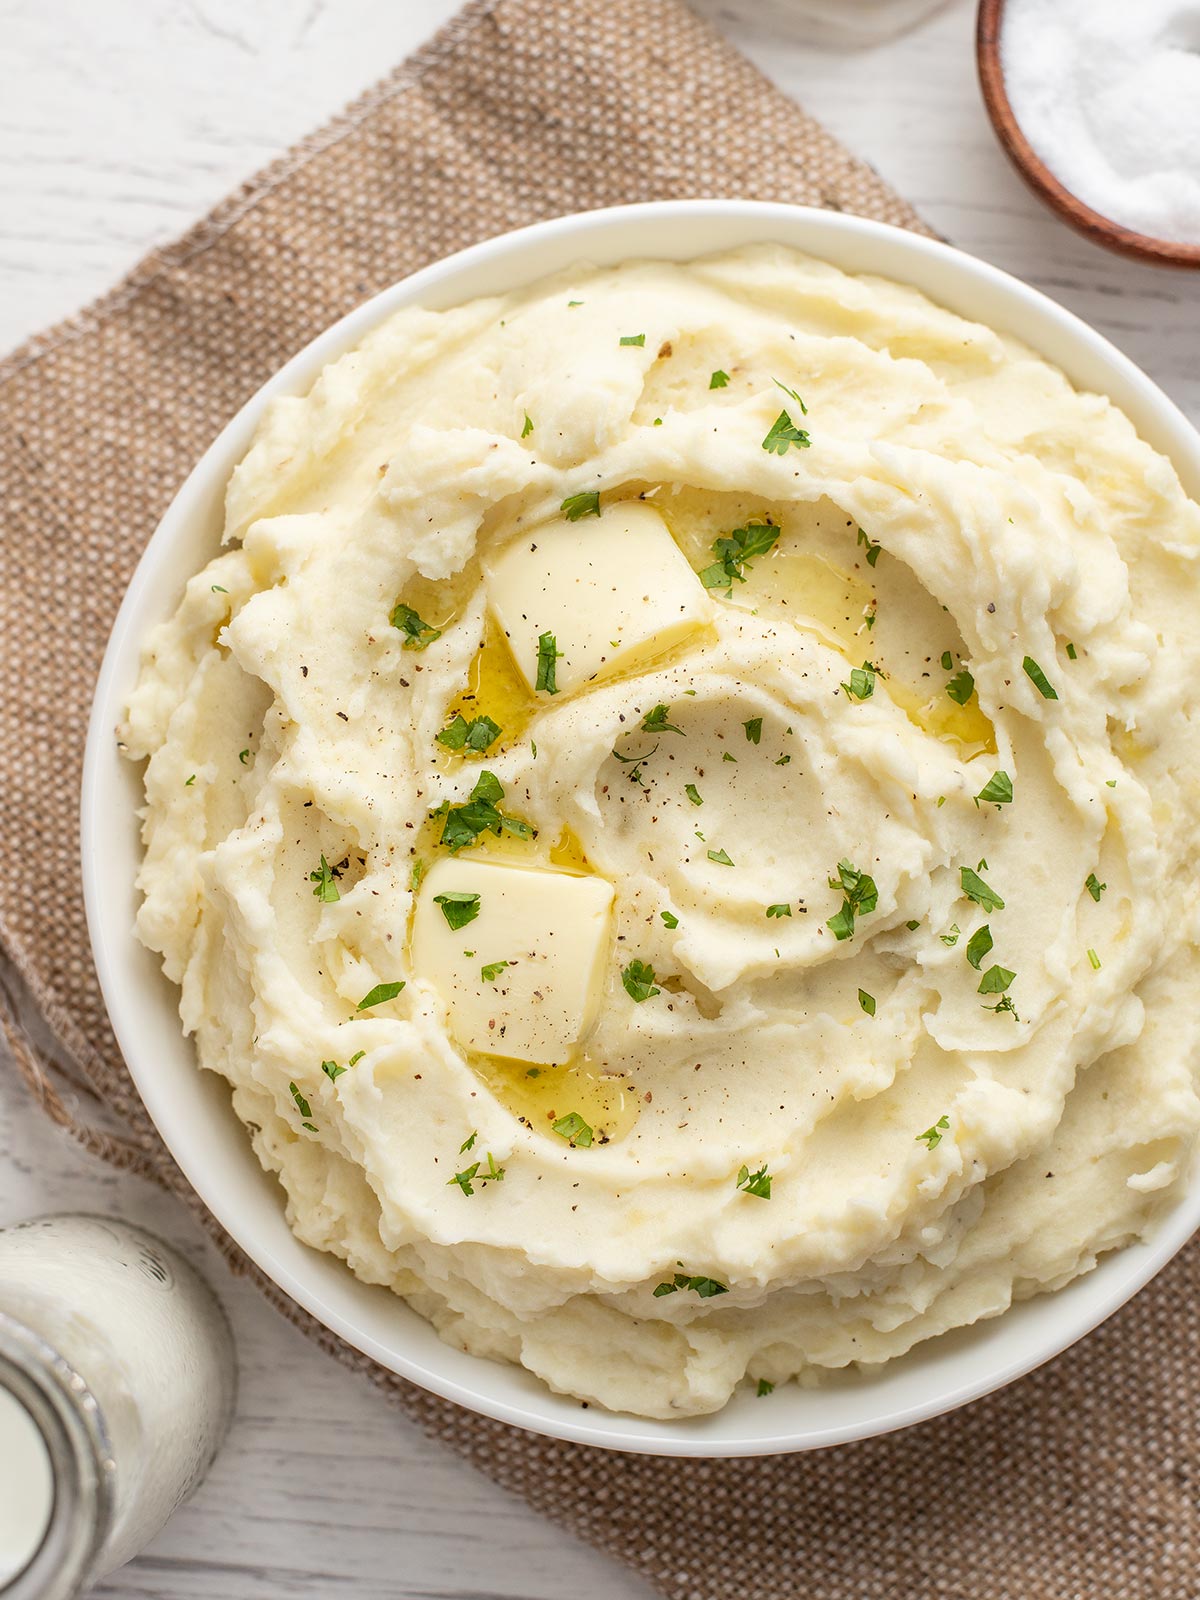 Overhead view of a bowl of mashed potatoes with melted butter.